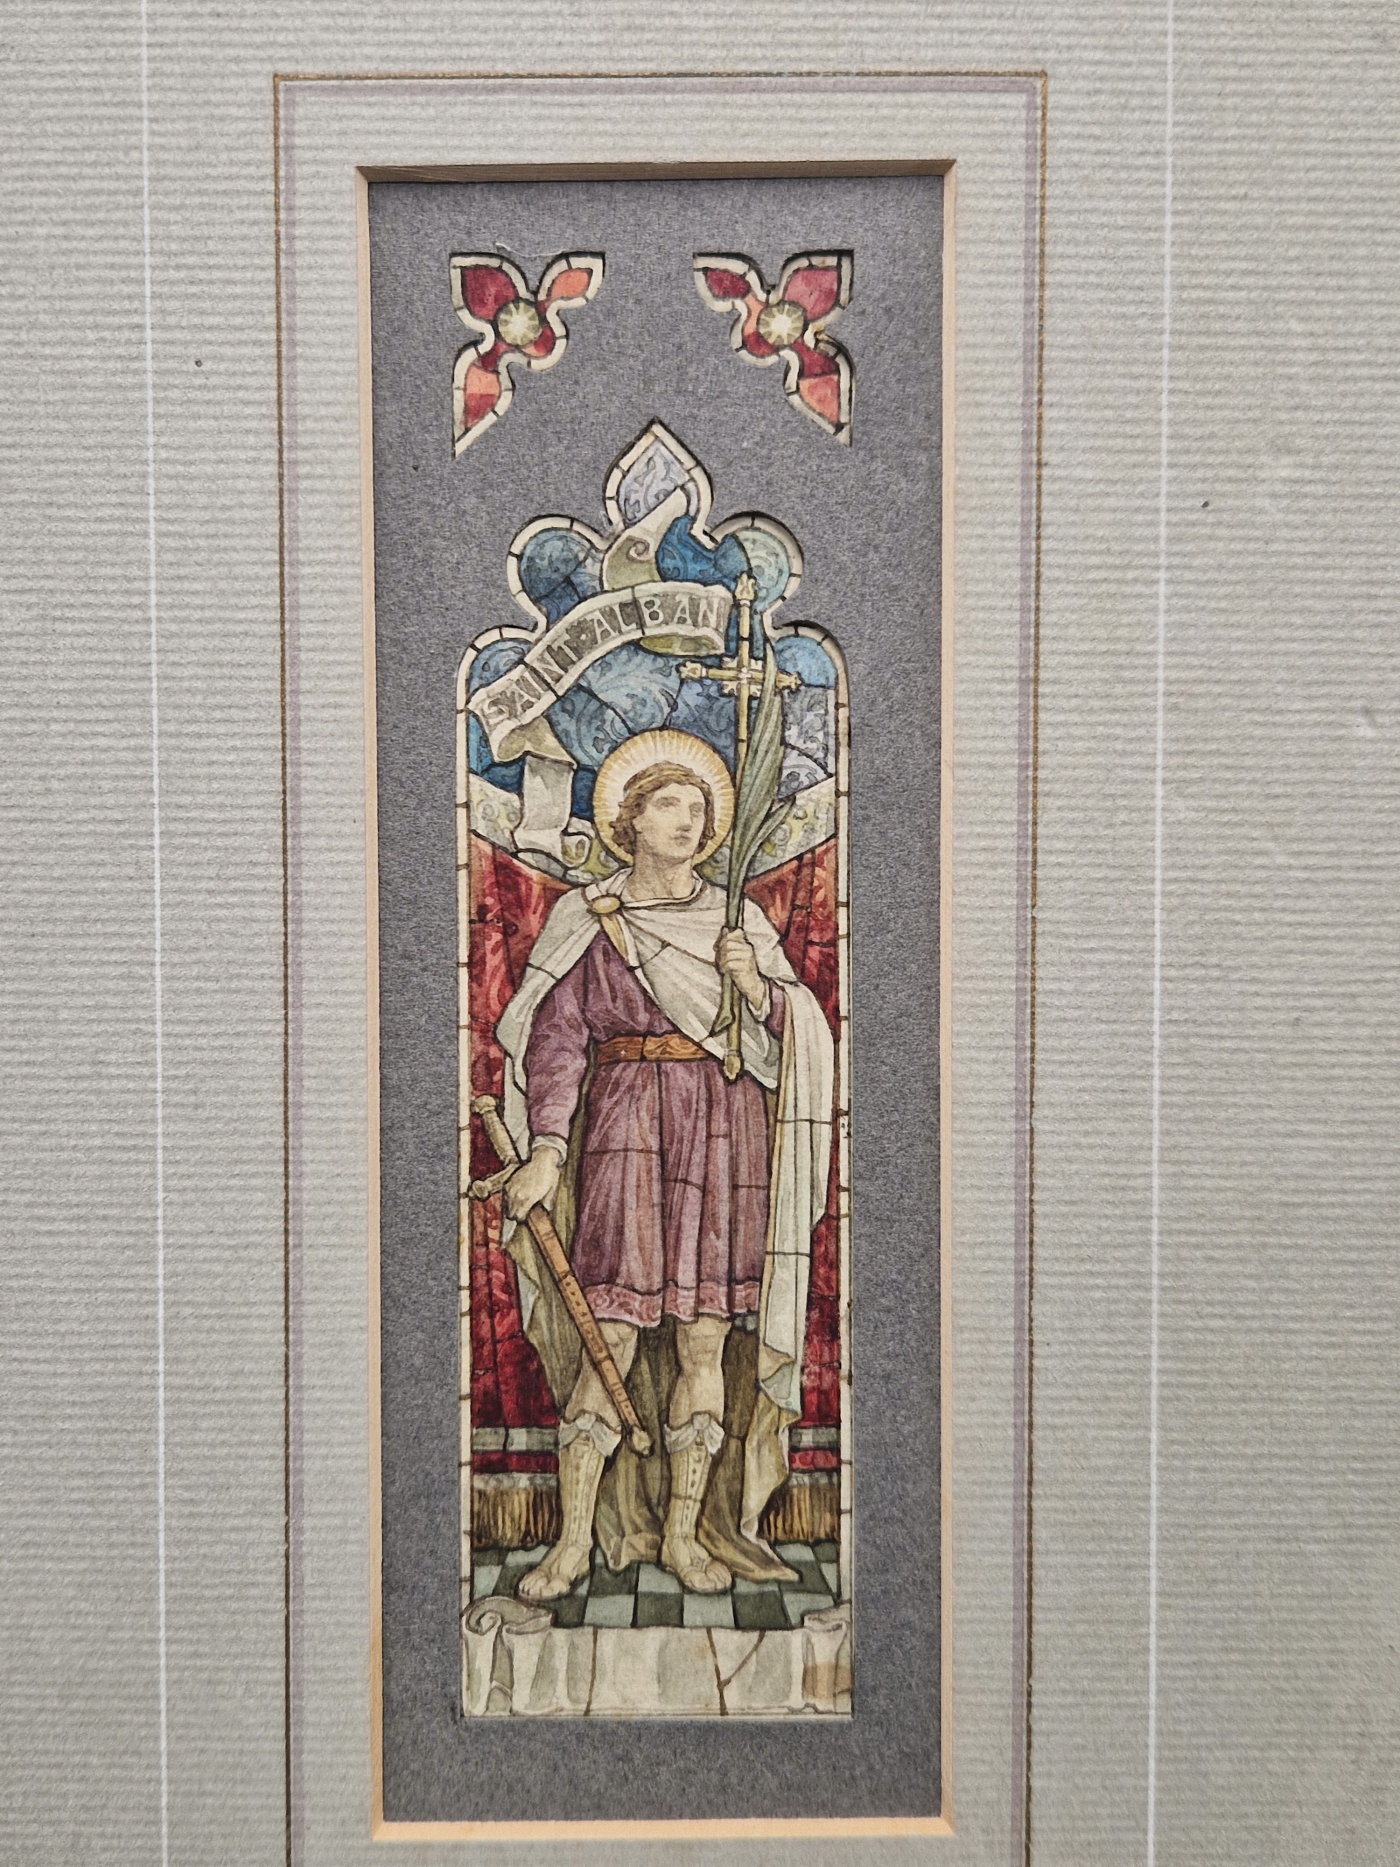 HEATON BUTLER & BAYNE, A STAINED GLASS WINDOW DESIGN DEPICTING ST ALBAN, WATERCOLOUR, 5.5 x 16cms - Image 2 of 4